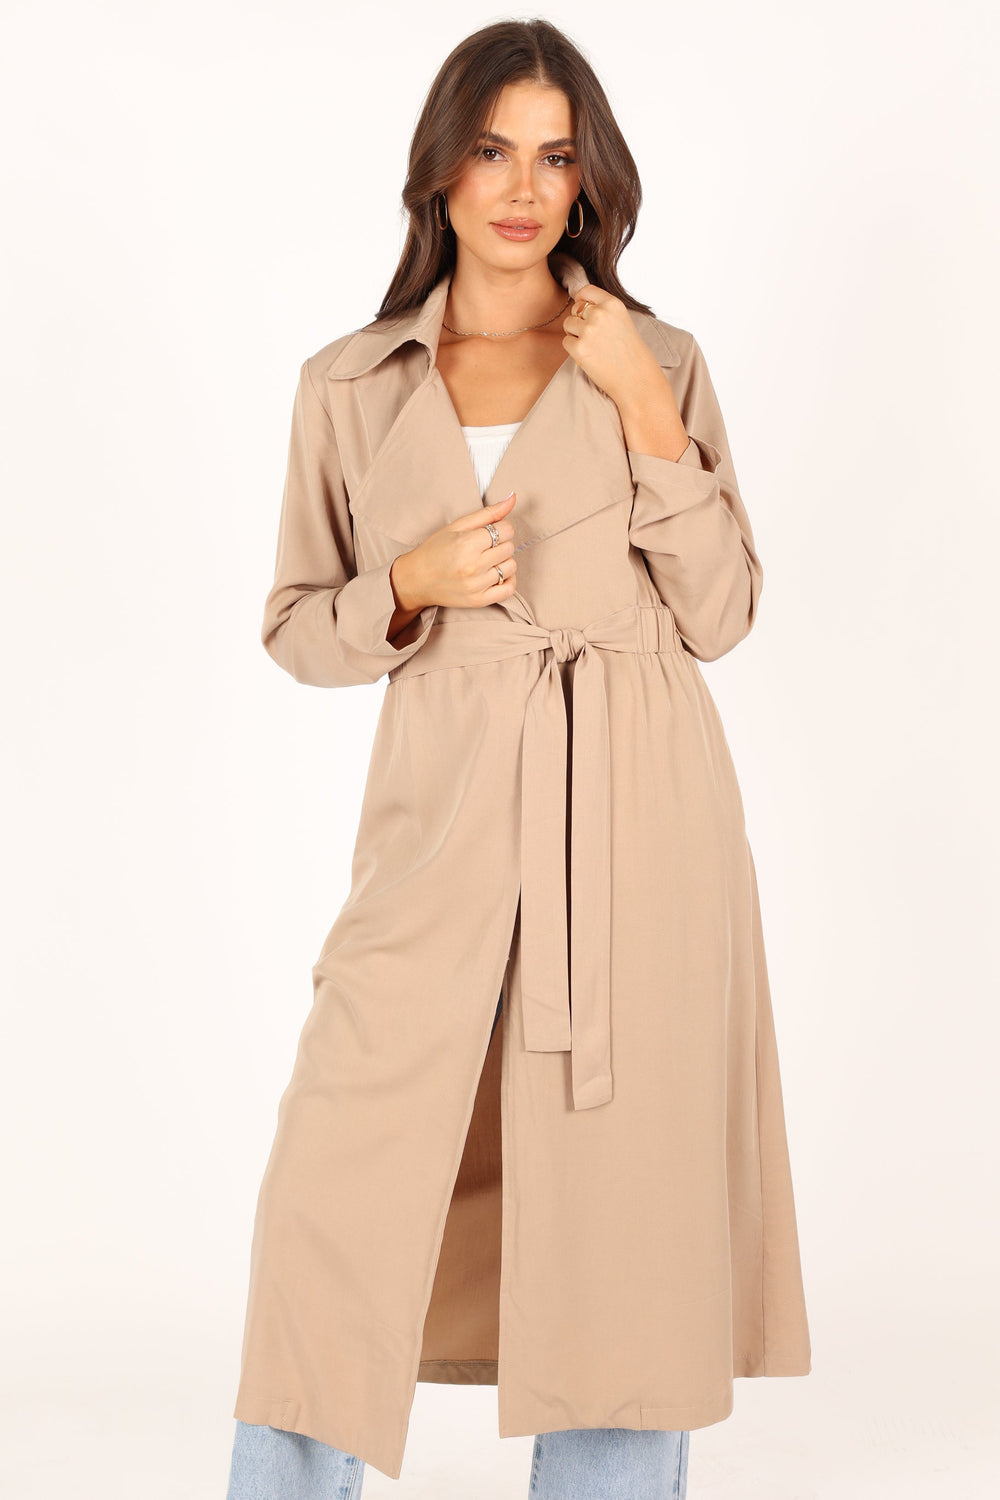 Petal and Pup USA Outerwear Robyn Tie Front Trench Coat - Beige